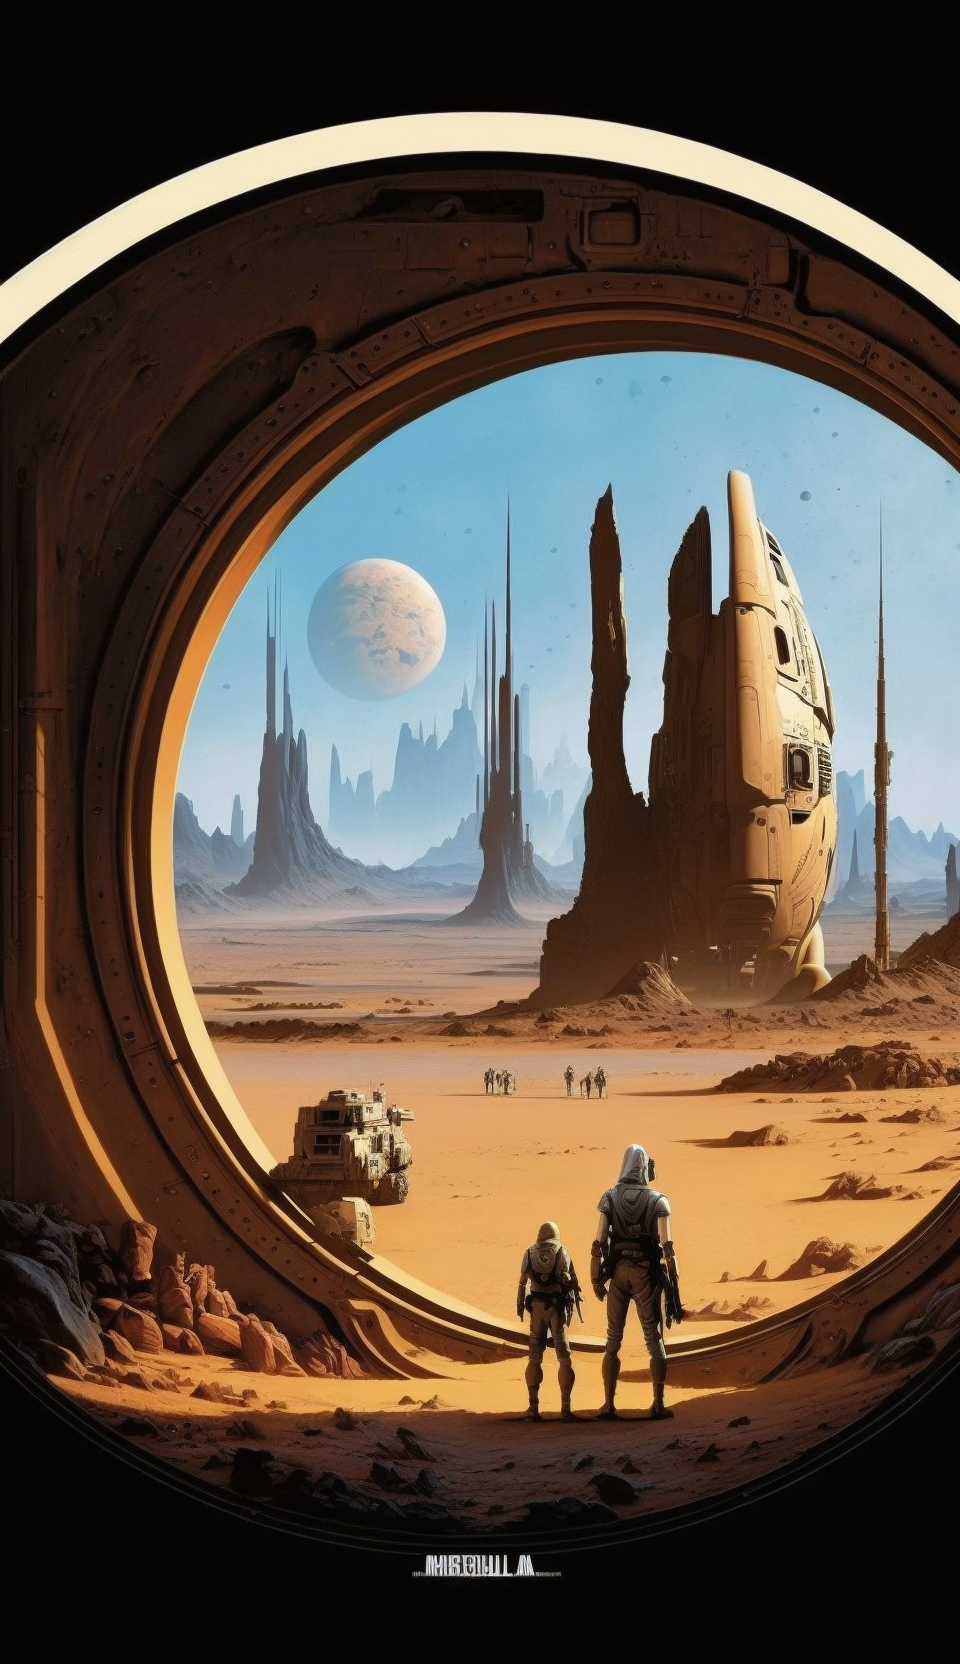 soupcan13_circle_in_the_style_of_Ralph_McQuarrie_8ec9ea90-b9c0-4bcb-aabd-17e67bcc4290.png